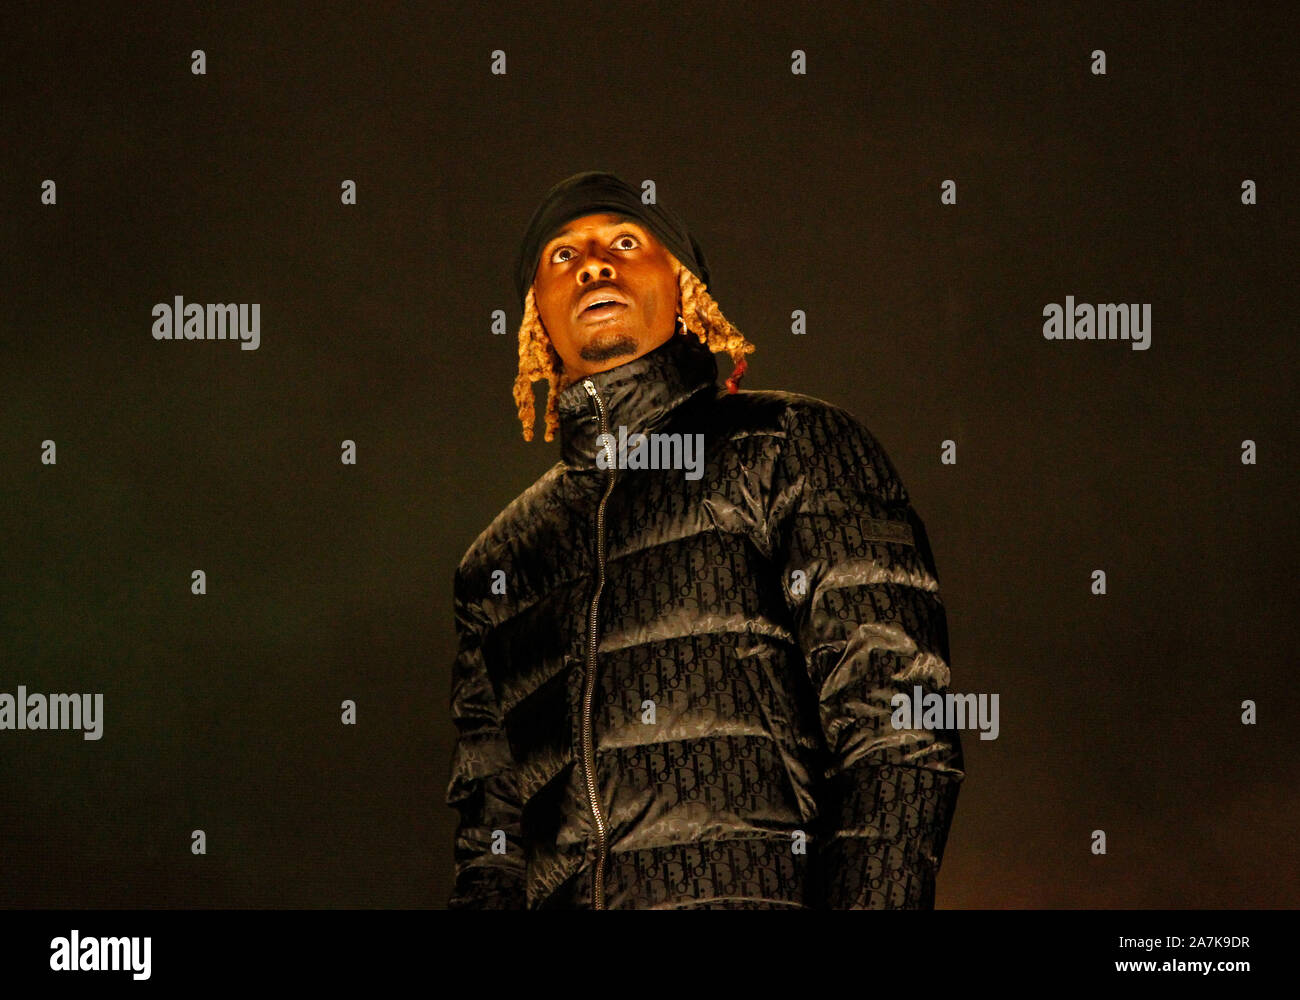 Atlanta based rapper Playboi Carti performs on stage during the Day N Vegas Music Festival at the Las Vegas Festival Grounds in Las Vegas, Nevada on Saturday, November 2, 2019.  Photo by James Atoa/UPI Stock Photo